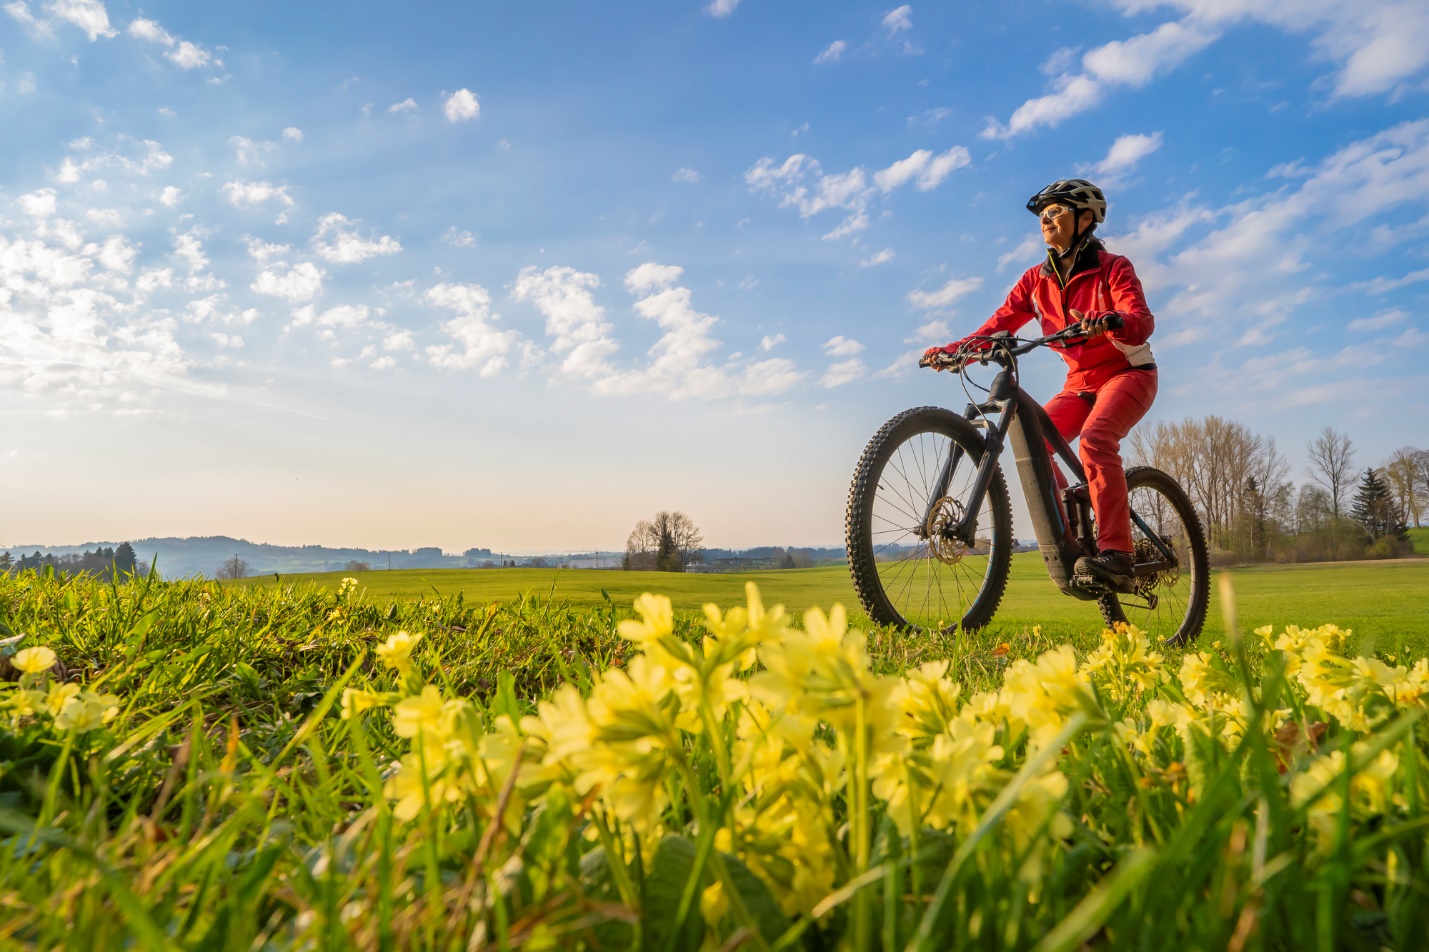 A person riding a bike in a field of flowers

Description automatically generated with medium confidence